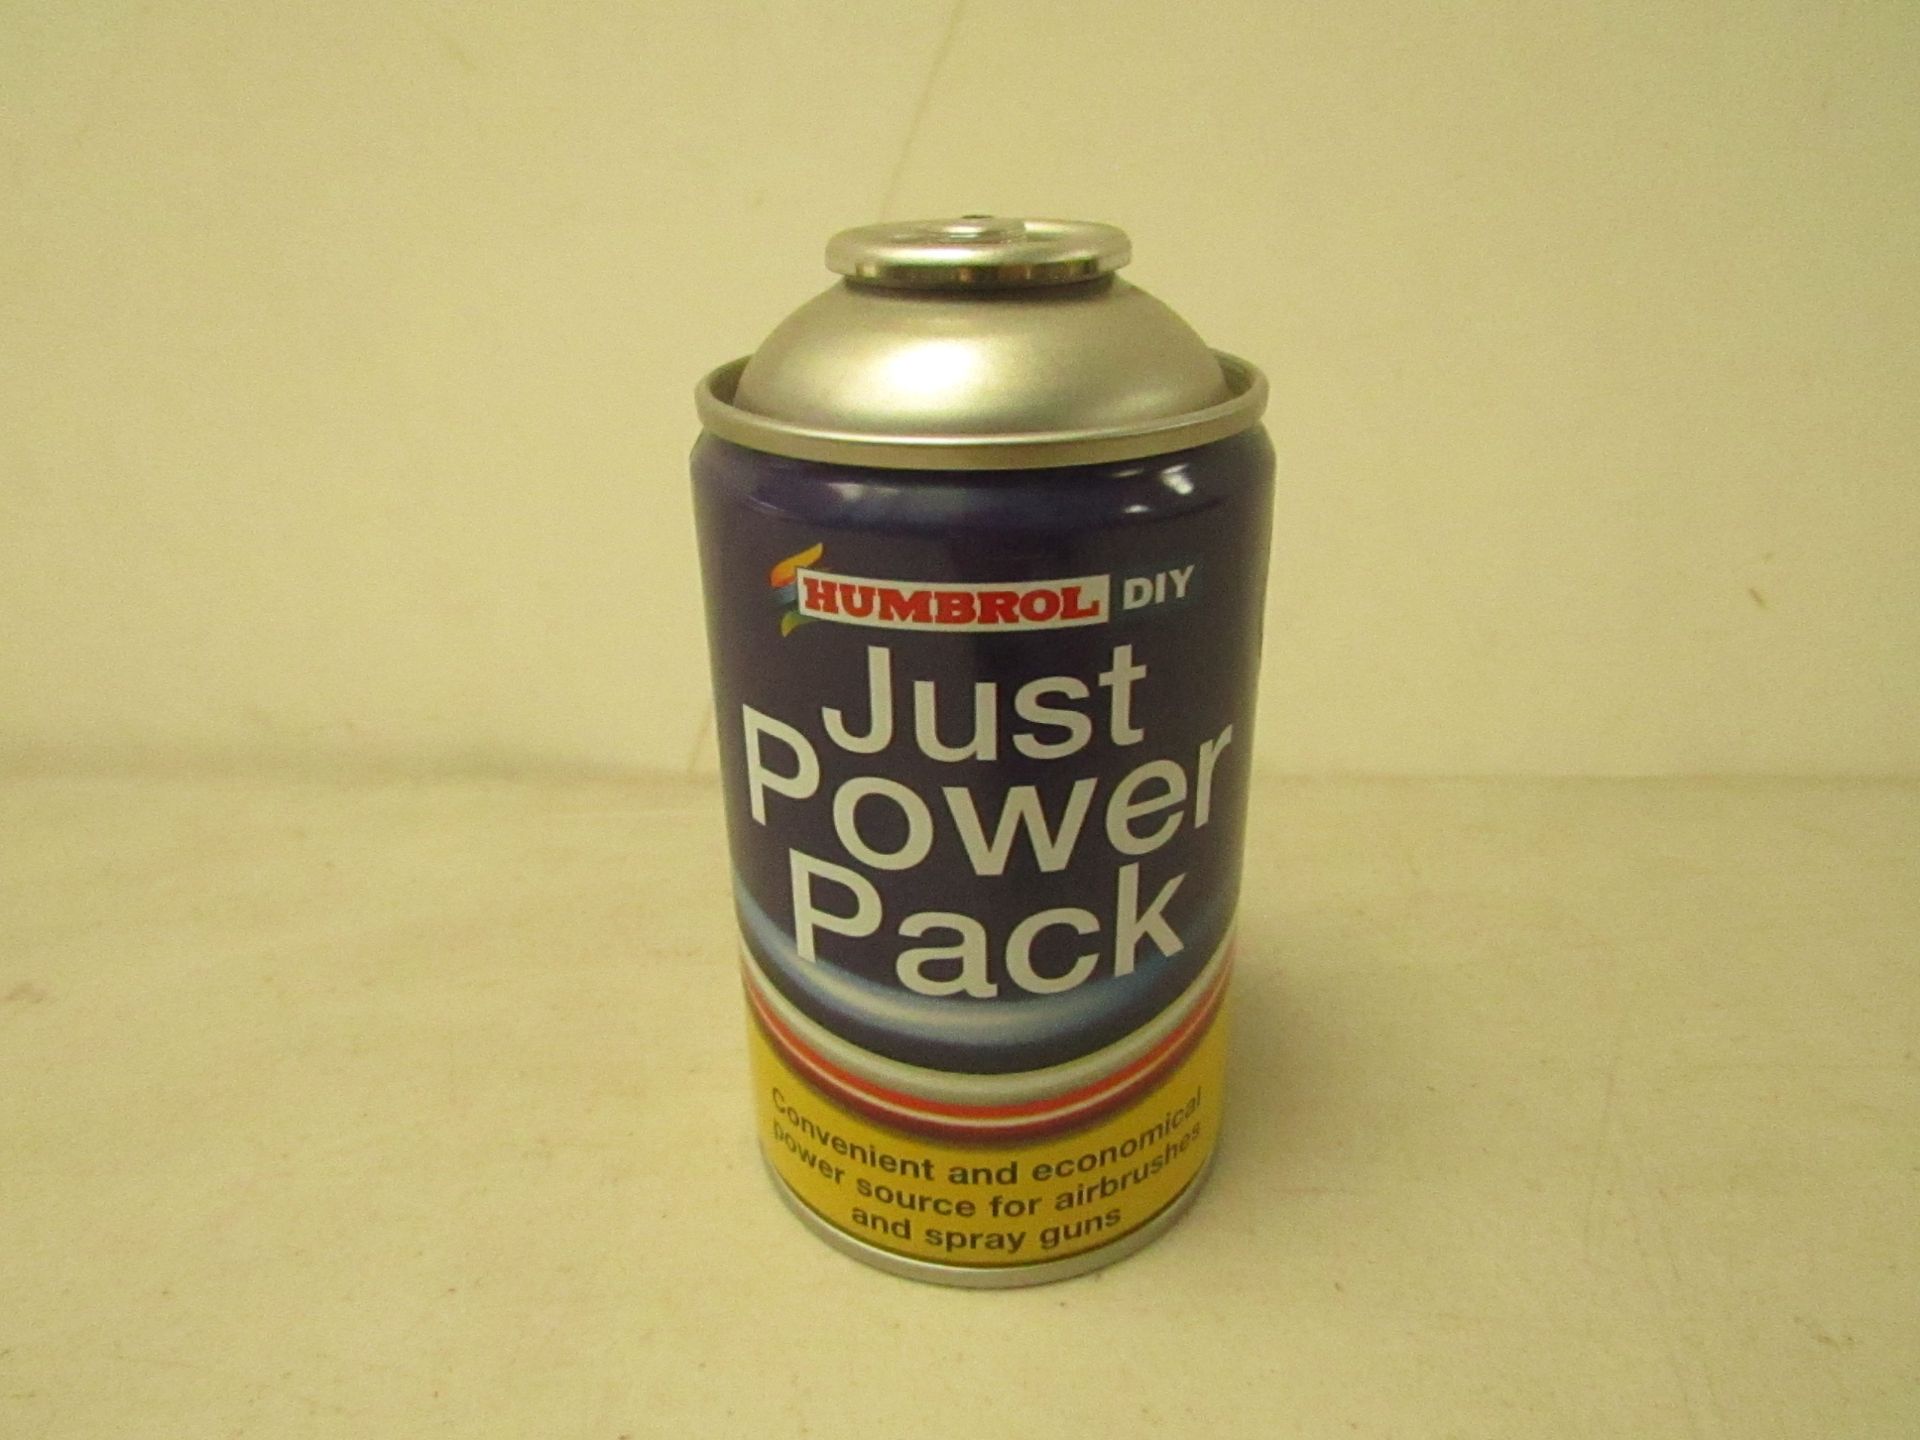 Box of 6x 250ml can of Humbrol just power pack, new